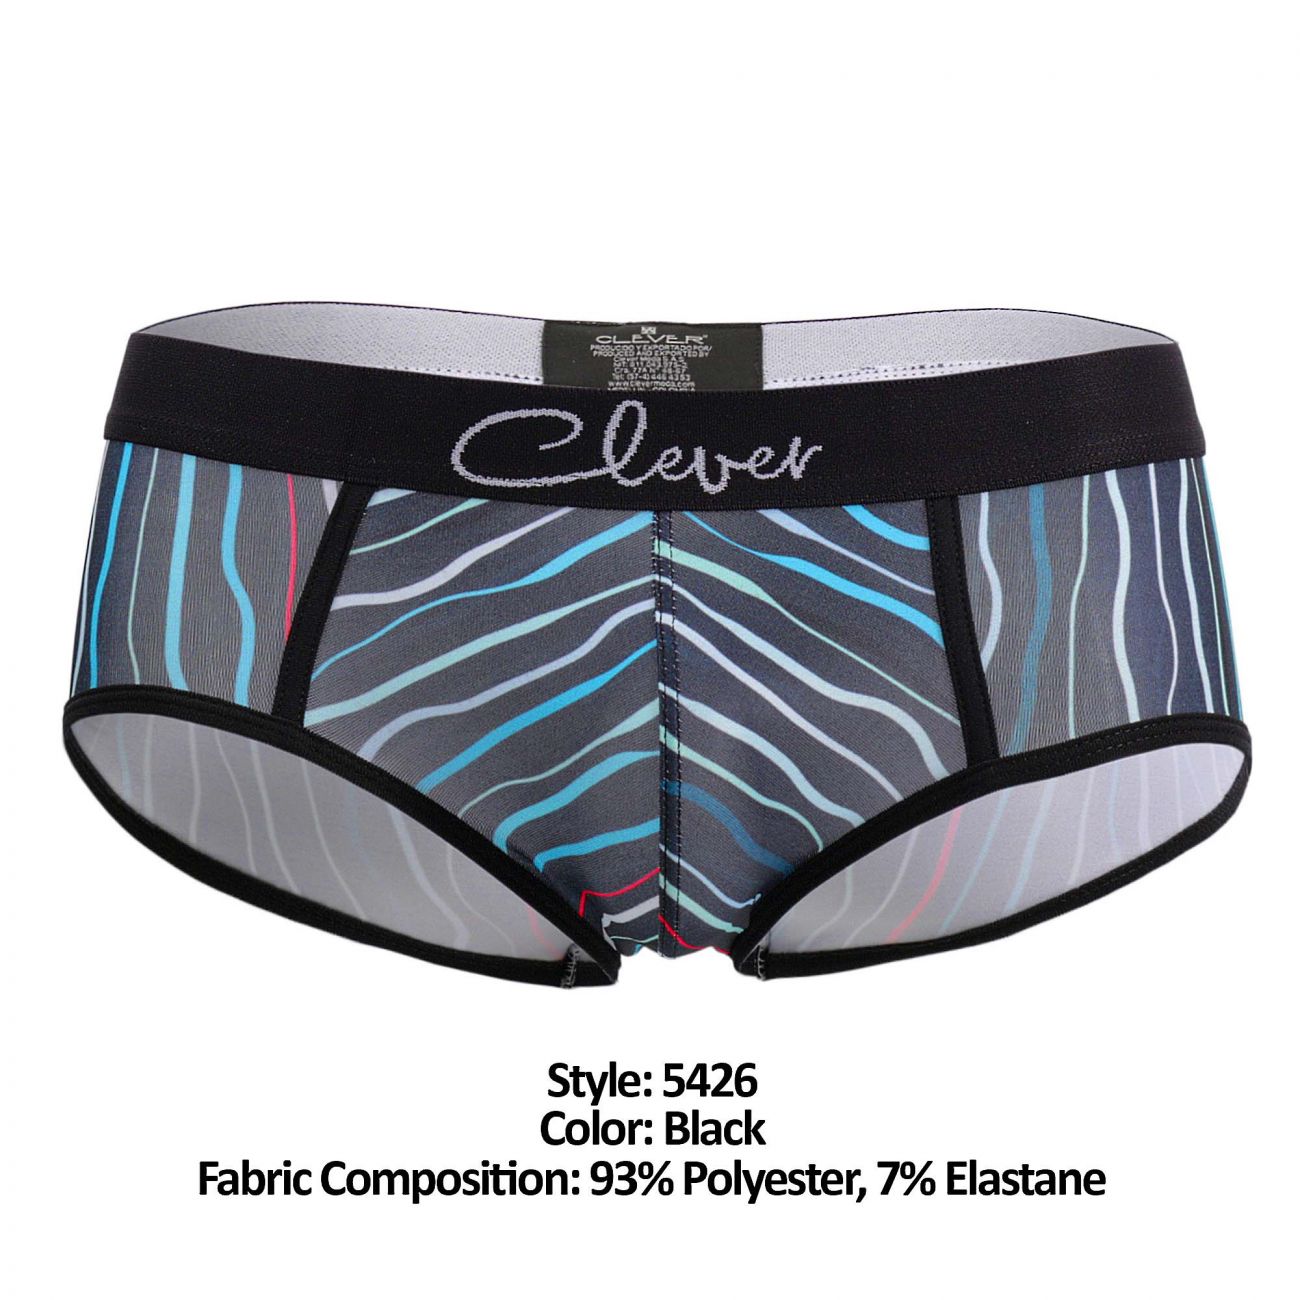 Clever 5426 Symbol Piping Briefs